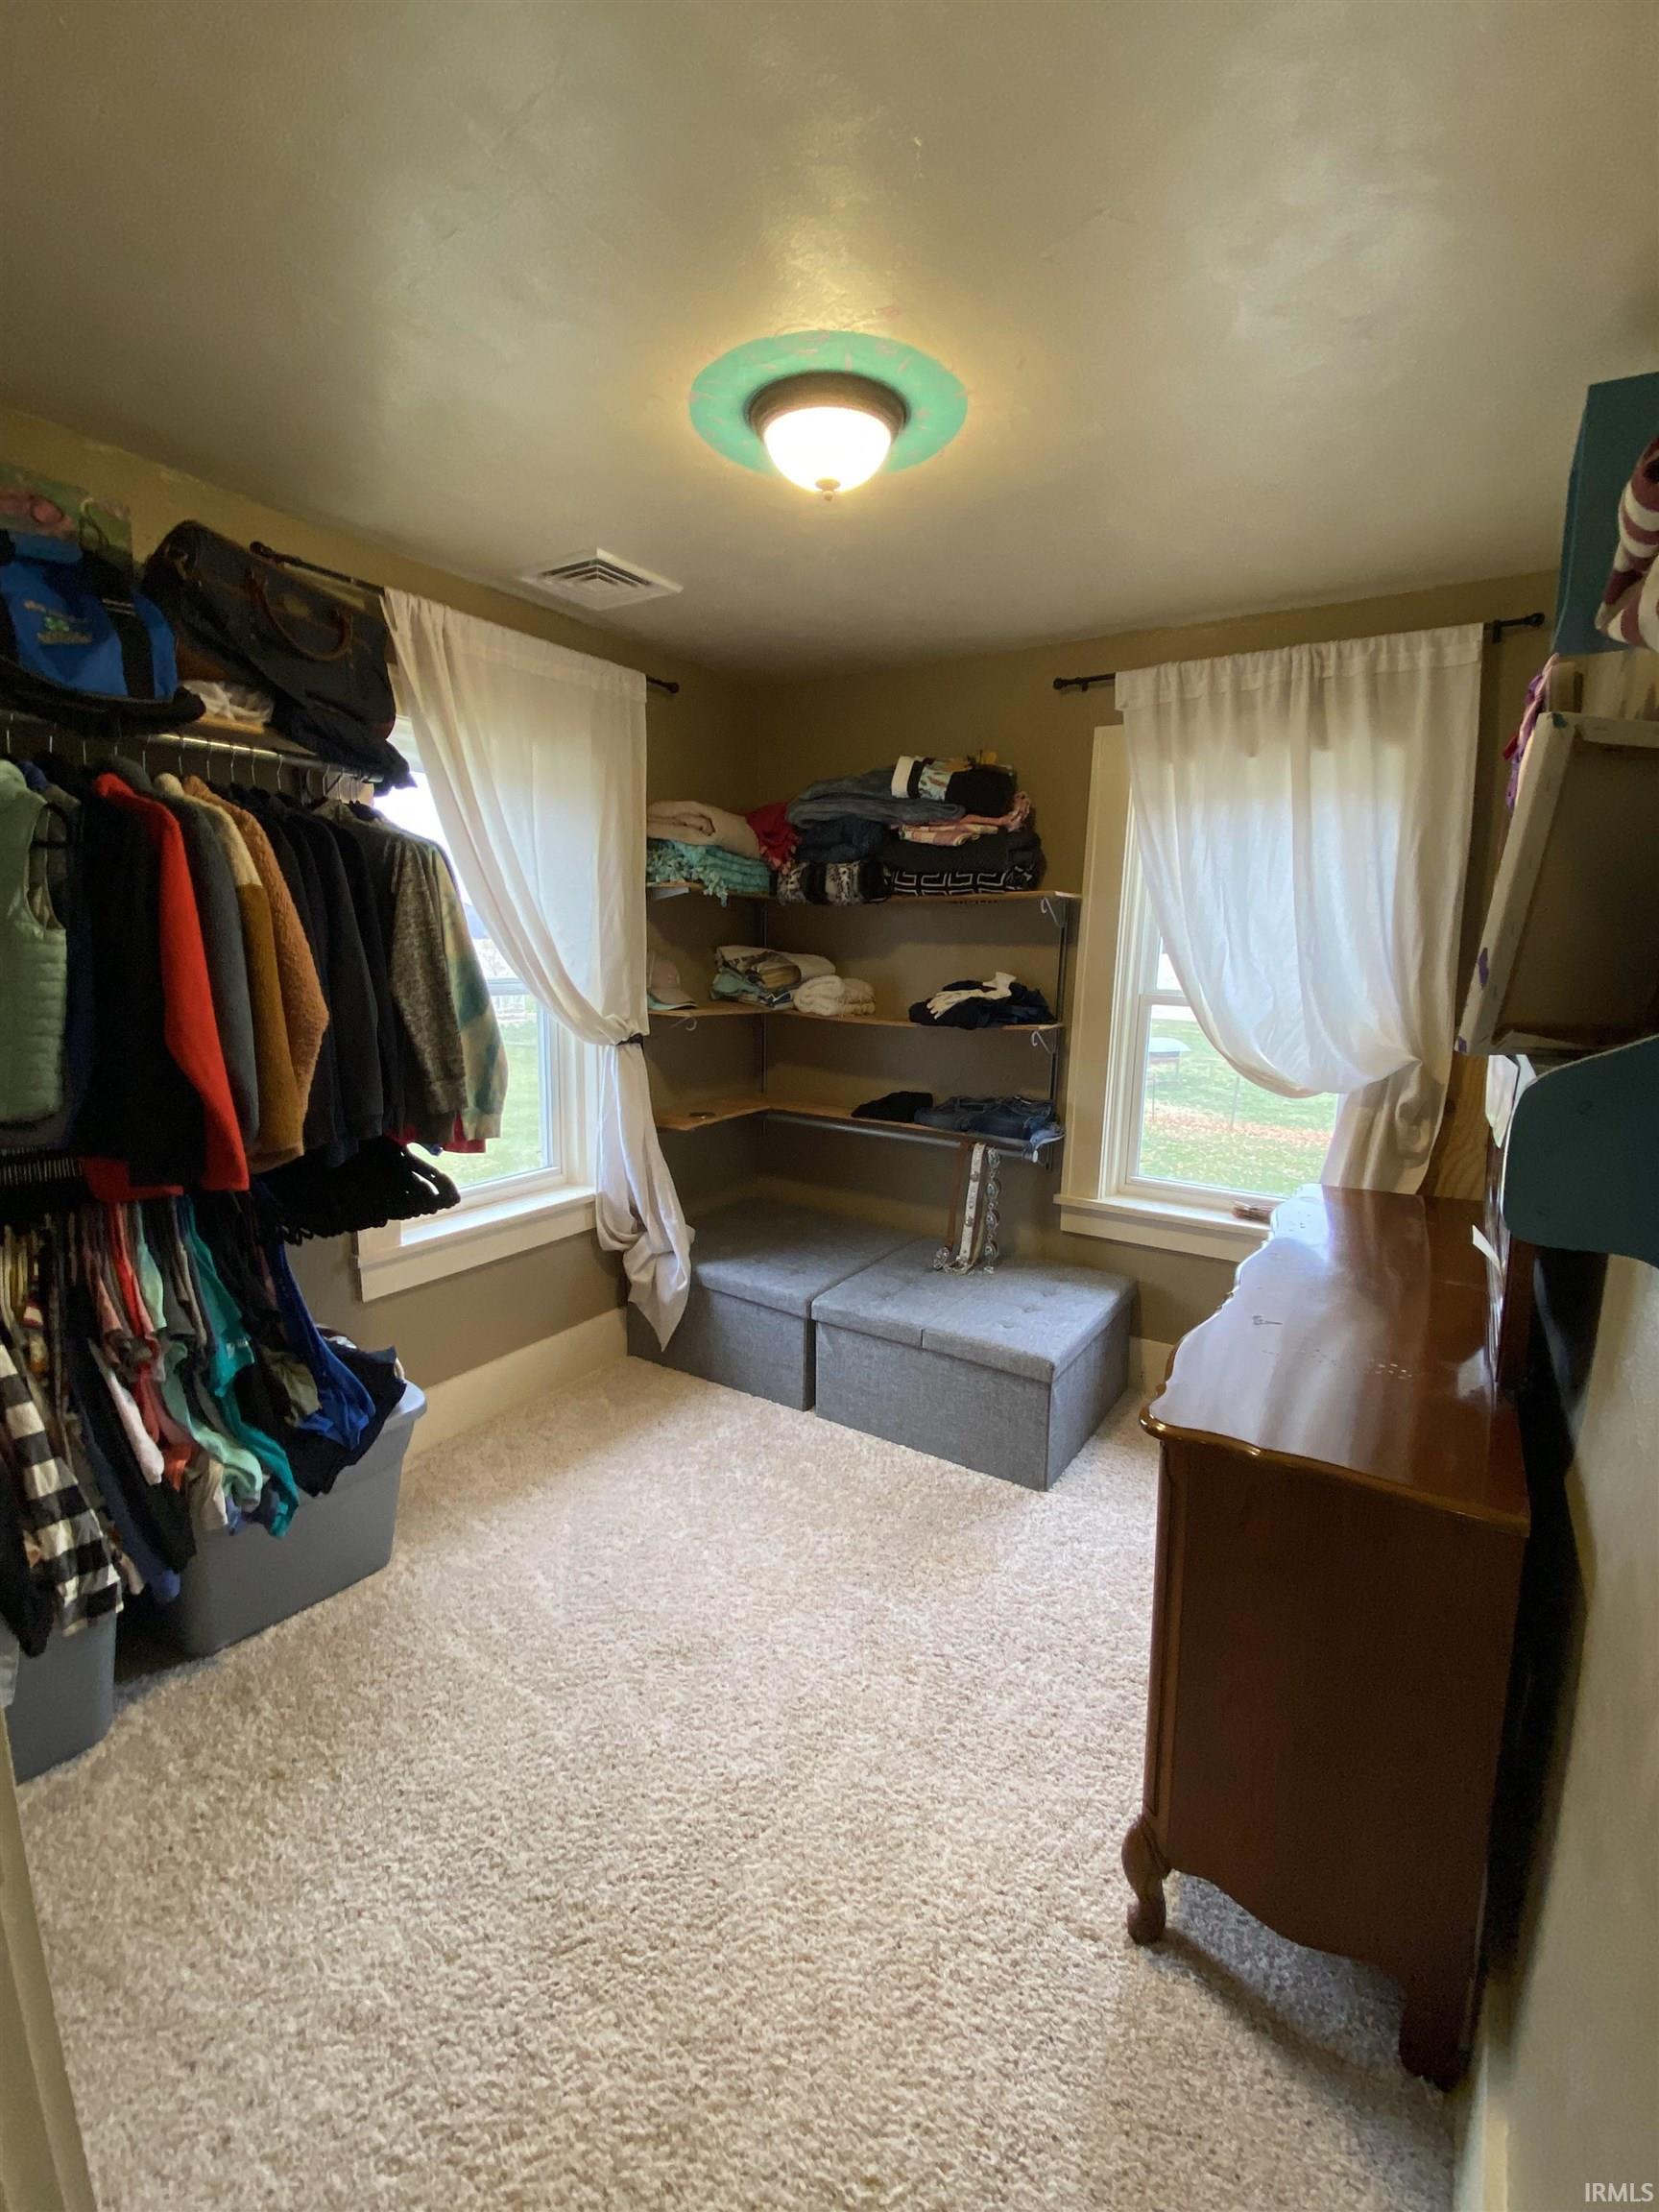 2nd Bedroom has Huge Walk in Closet!  It Could Easily be an Office or a Nursery!